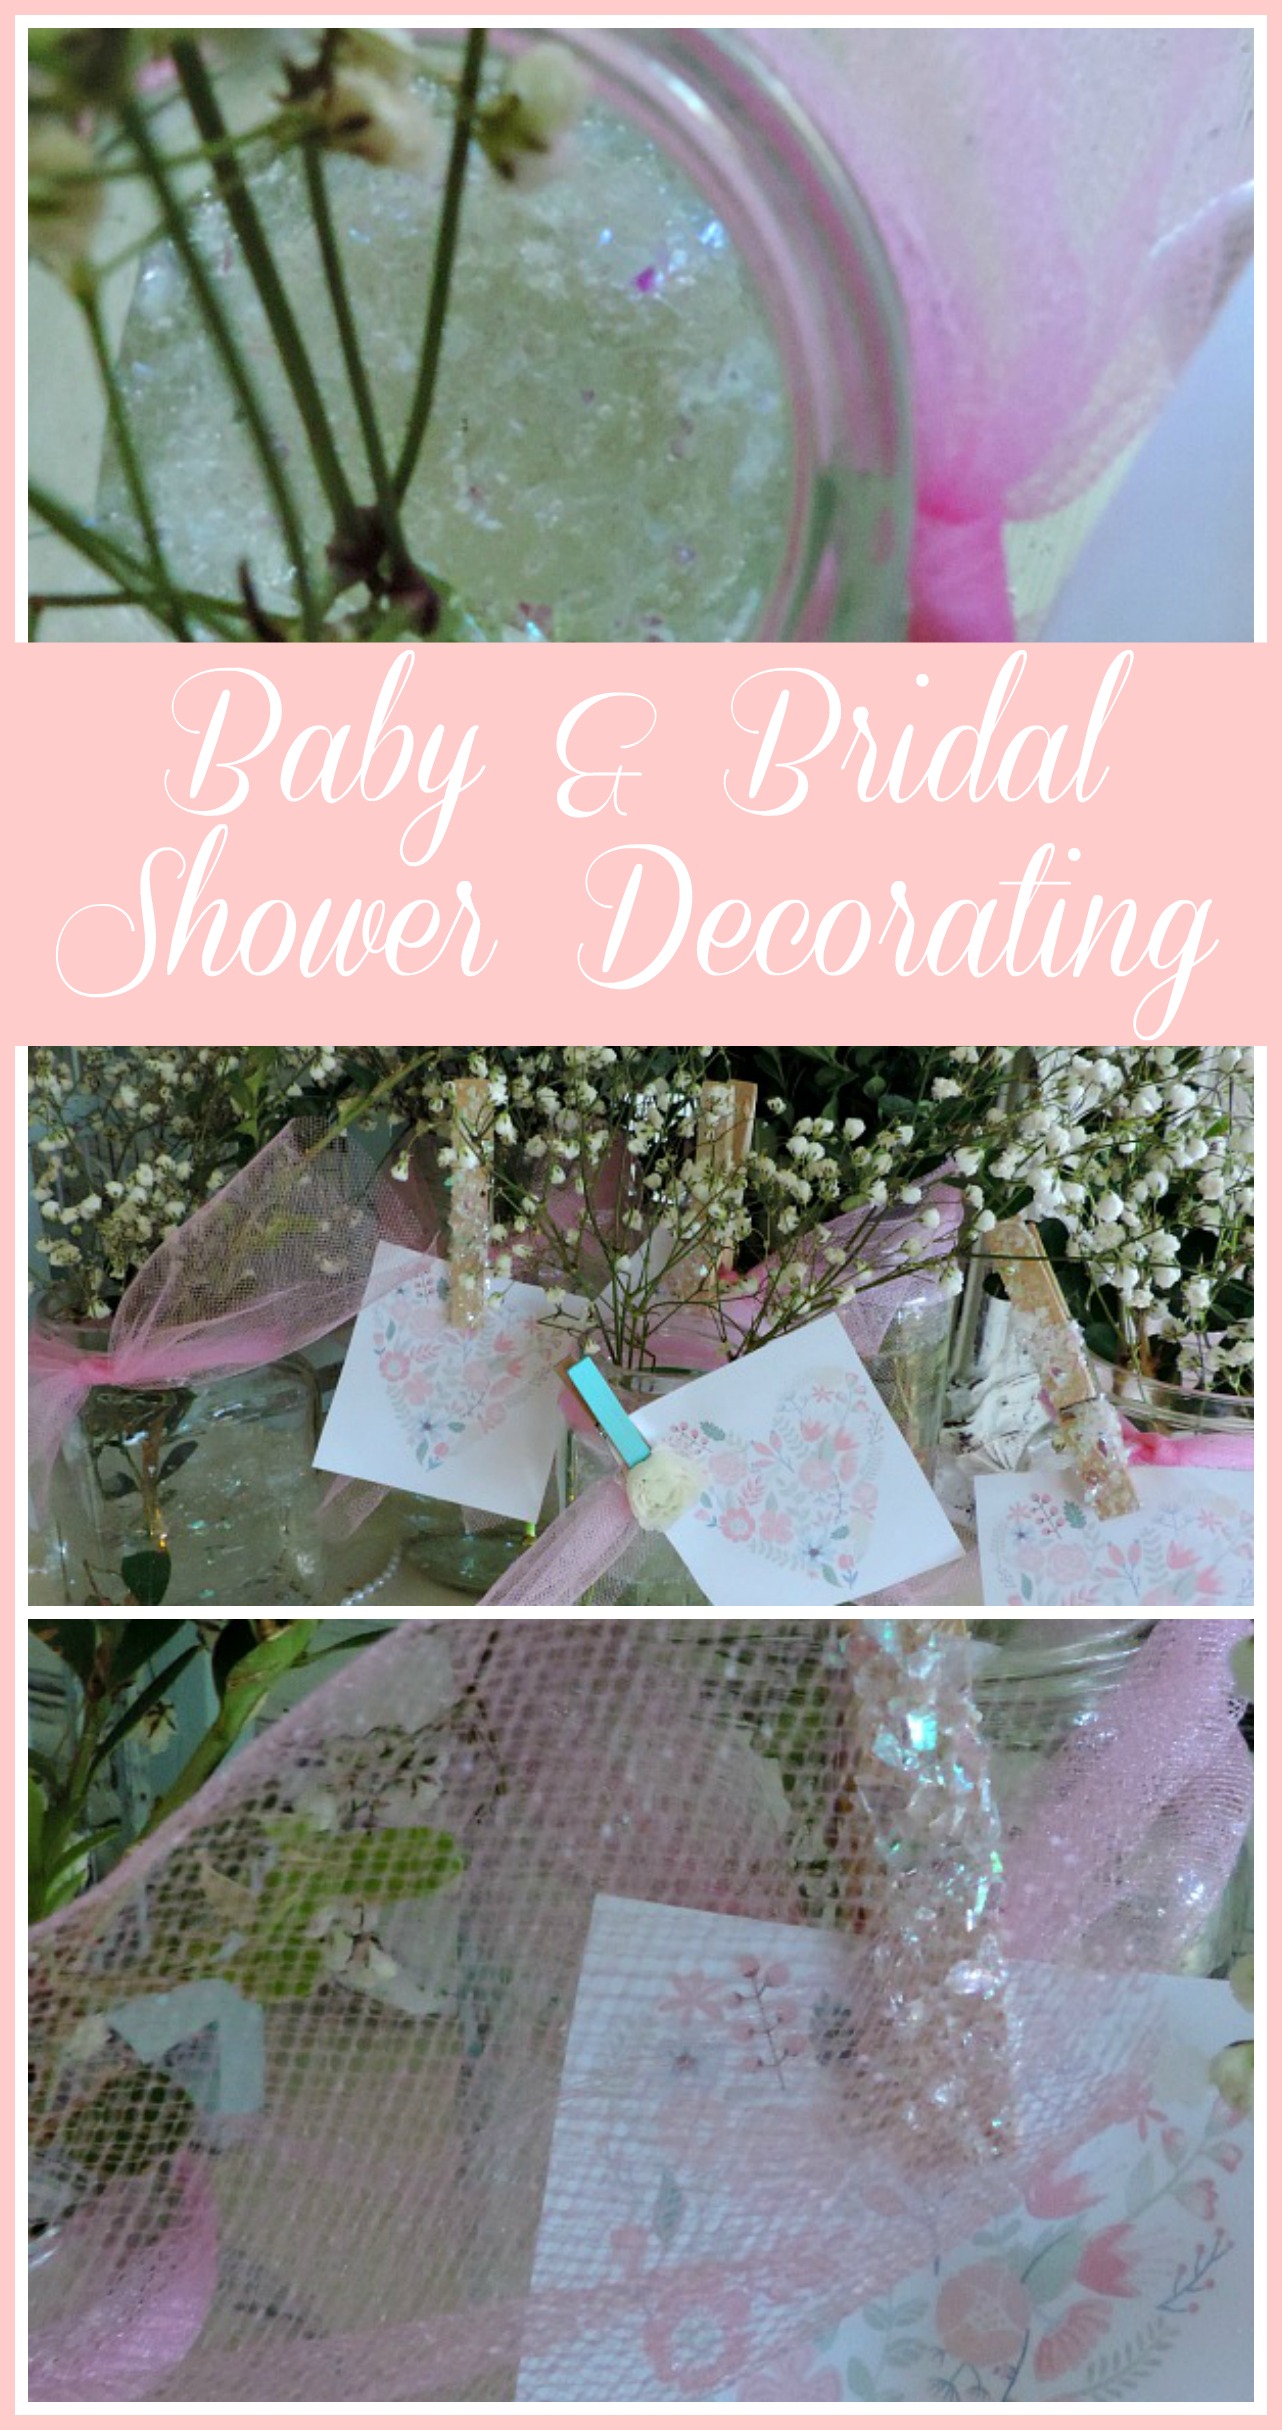 Baby and Bridal Shower Decorating